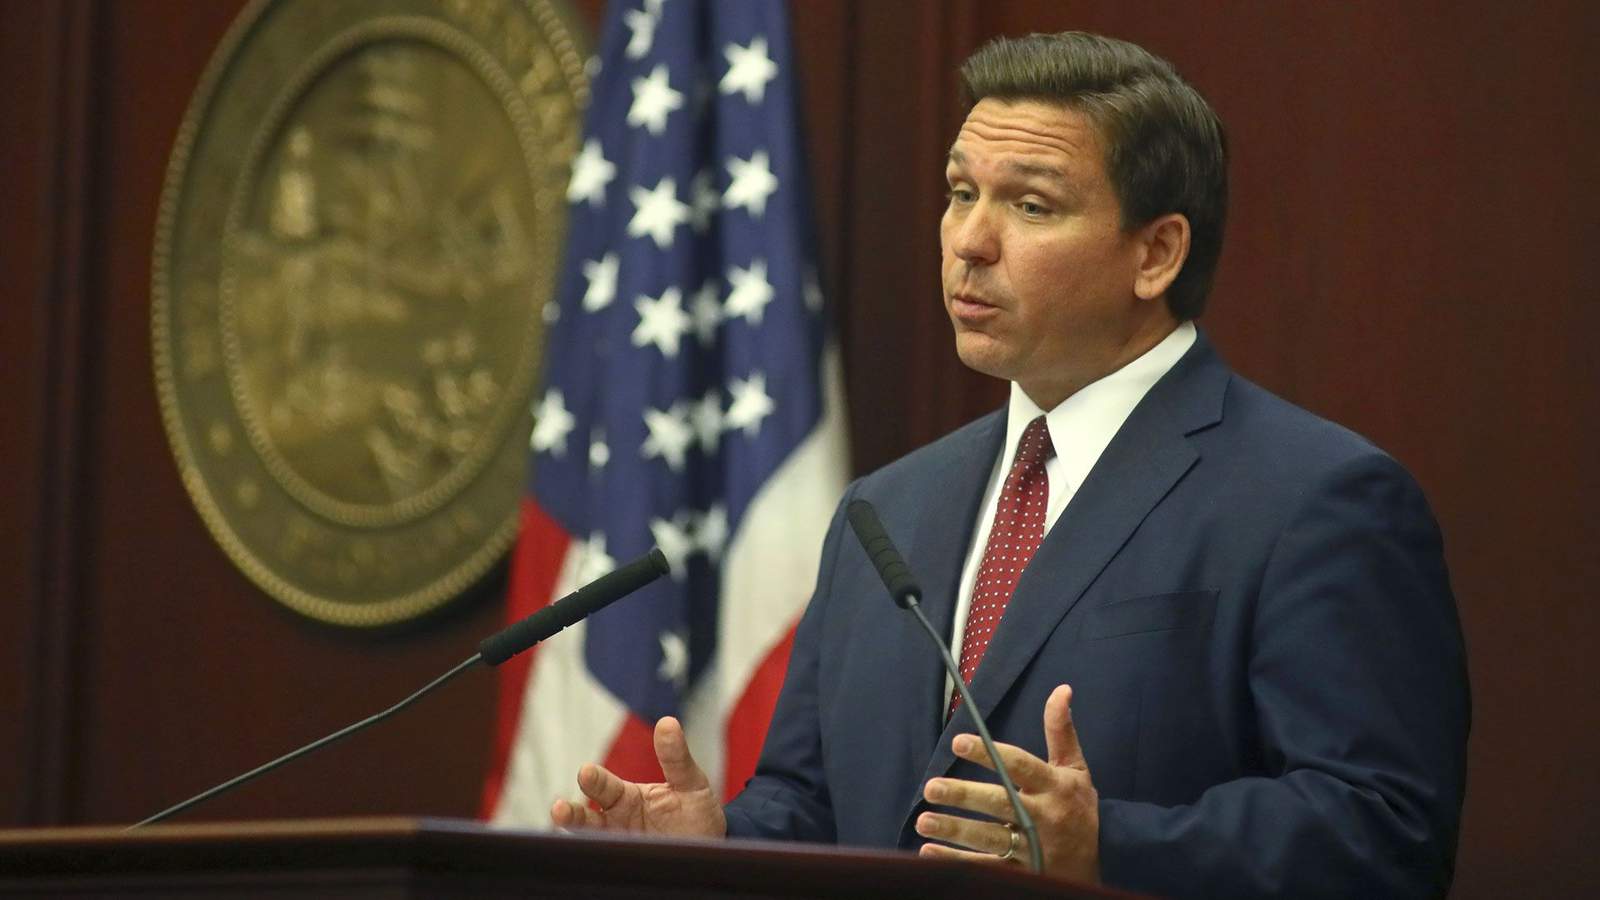 WATCH LIVE: Gov. Ron DeSantis holds news conference in Ocala